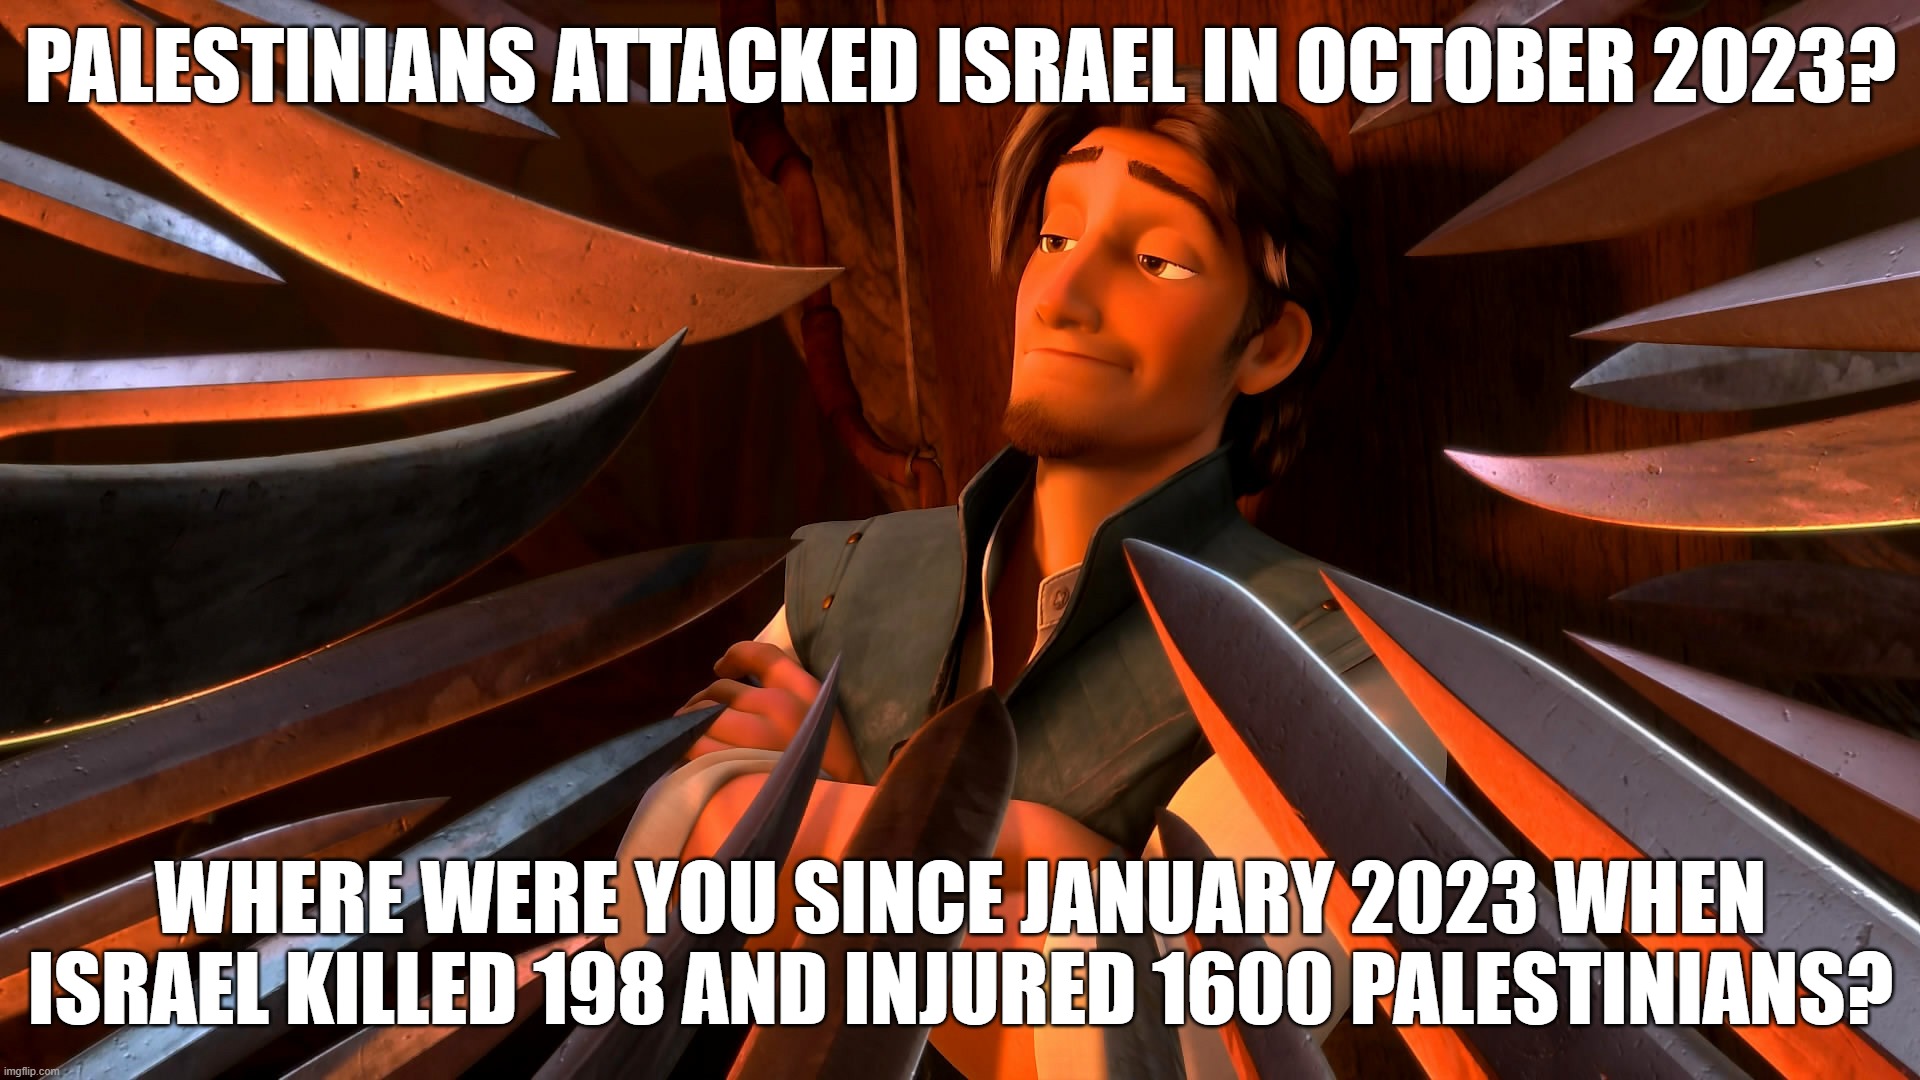 Let's See How Many Snowflakes Do I Trigger With Simple Facts Like These | PALESTINIANS ATTACKED ISRAEL IN OCTOBER 2023? WHERE WERE YOU SINCE JANUARY 2023 WHEN ISRAEL KILLED 198 AND INJURED 1600 PALESTINIANS? | image tagged in unpopular opinion flynn,israel,palestine,hypocrisy,triggered,snowflakes | made w/ Imgflip meme maker